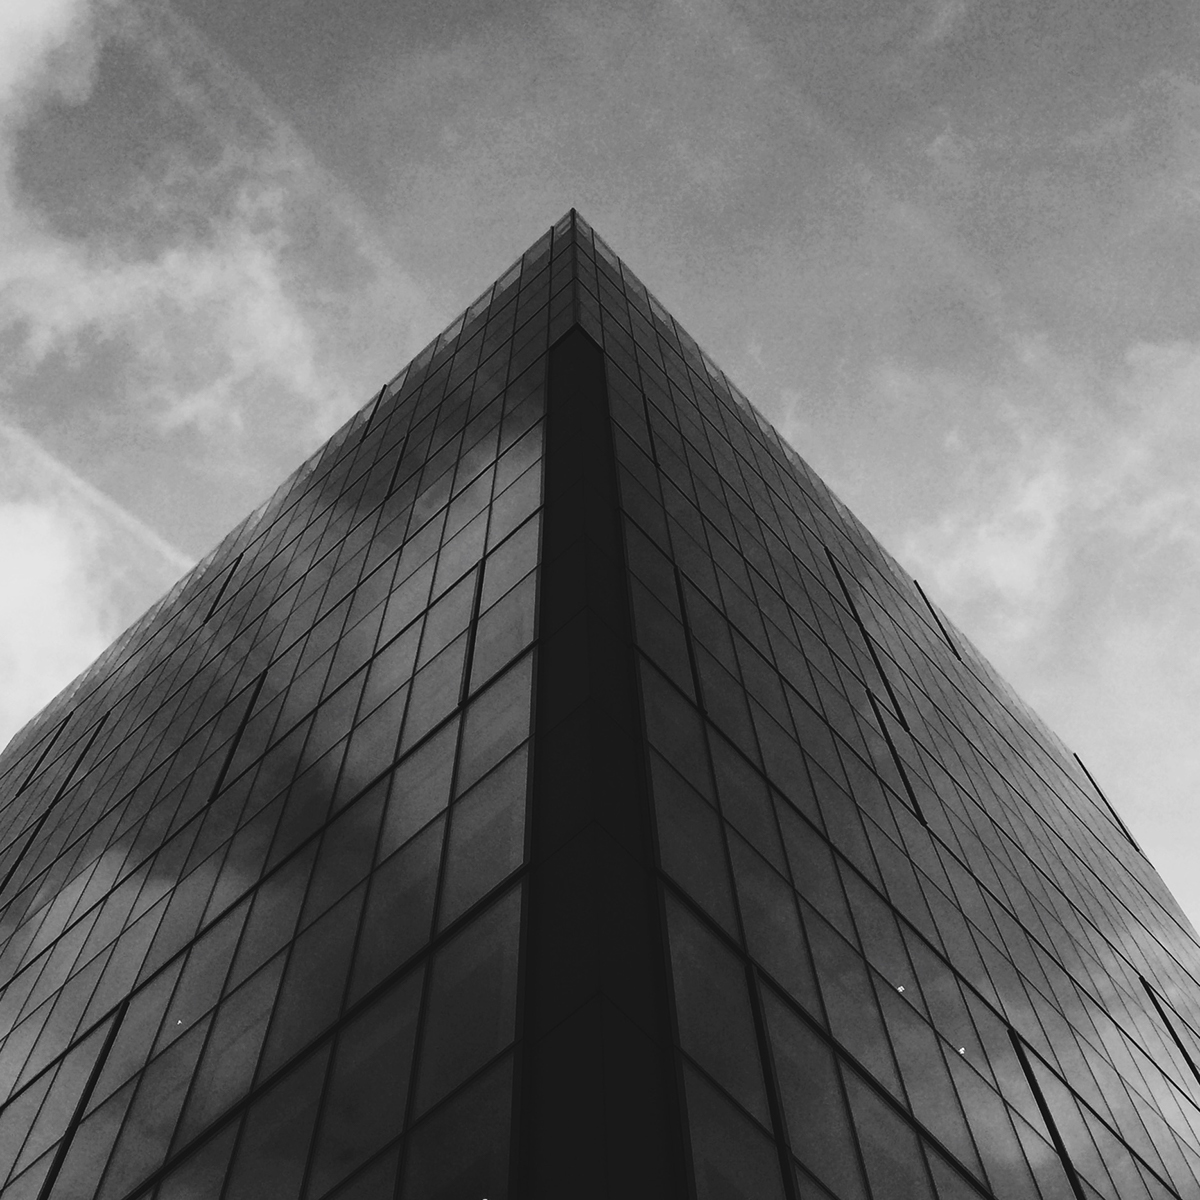 Perspective London UK buildings up SKY black and white b&w sarah brust